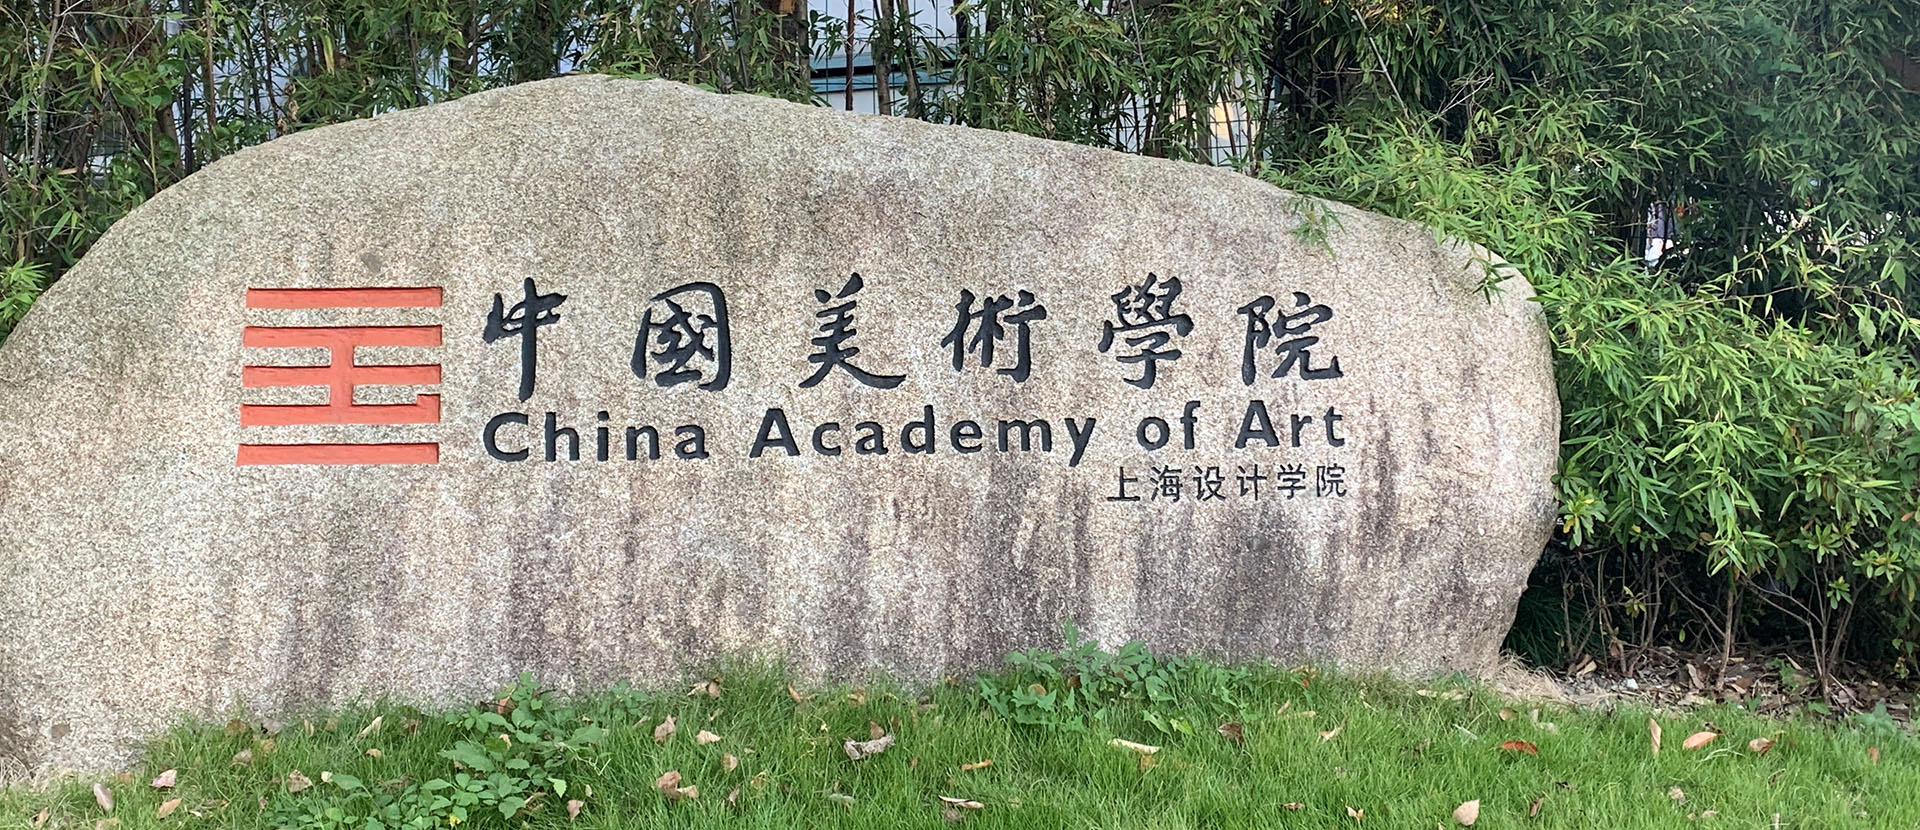 Picture of China Academy of Art welcome sign